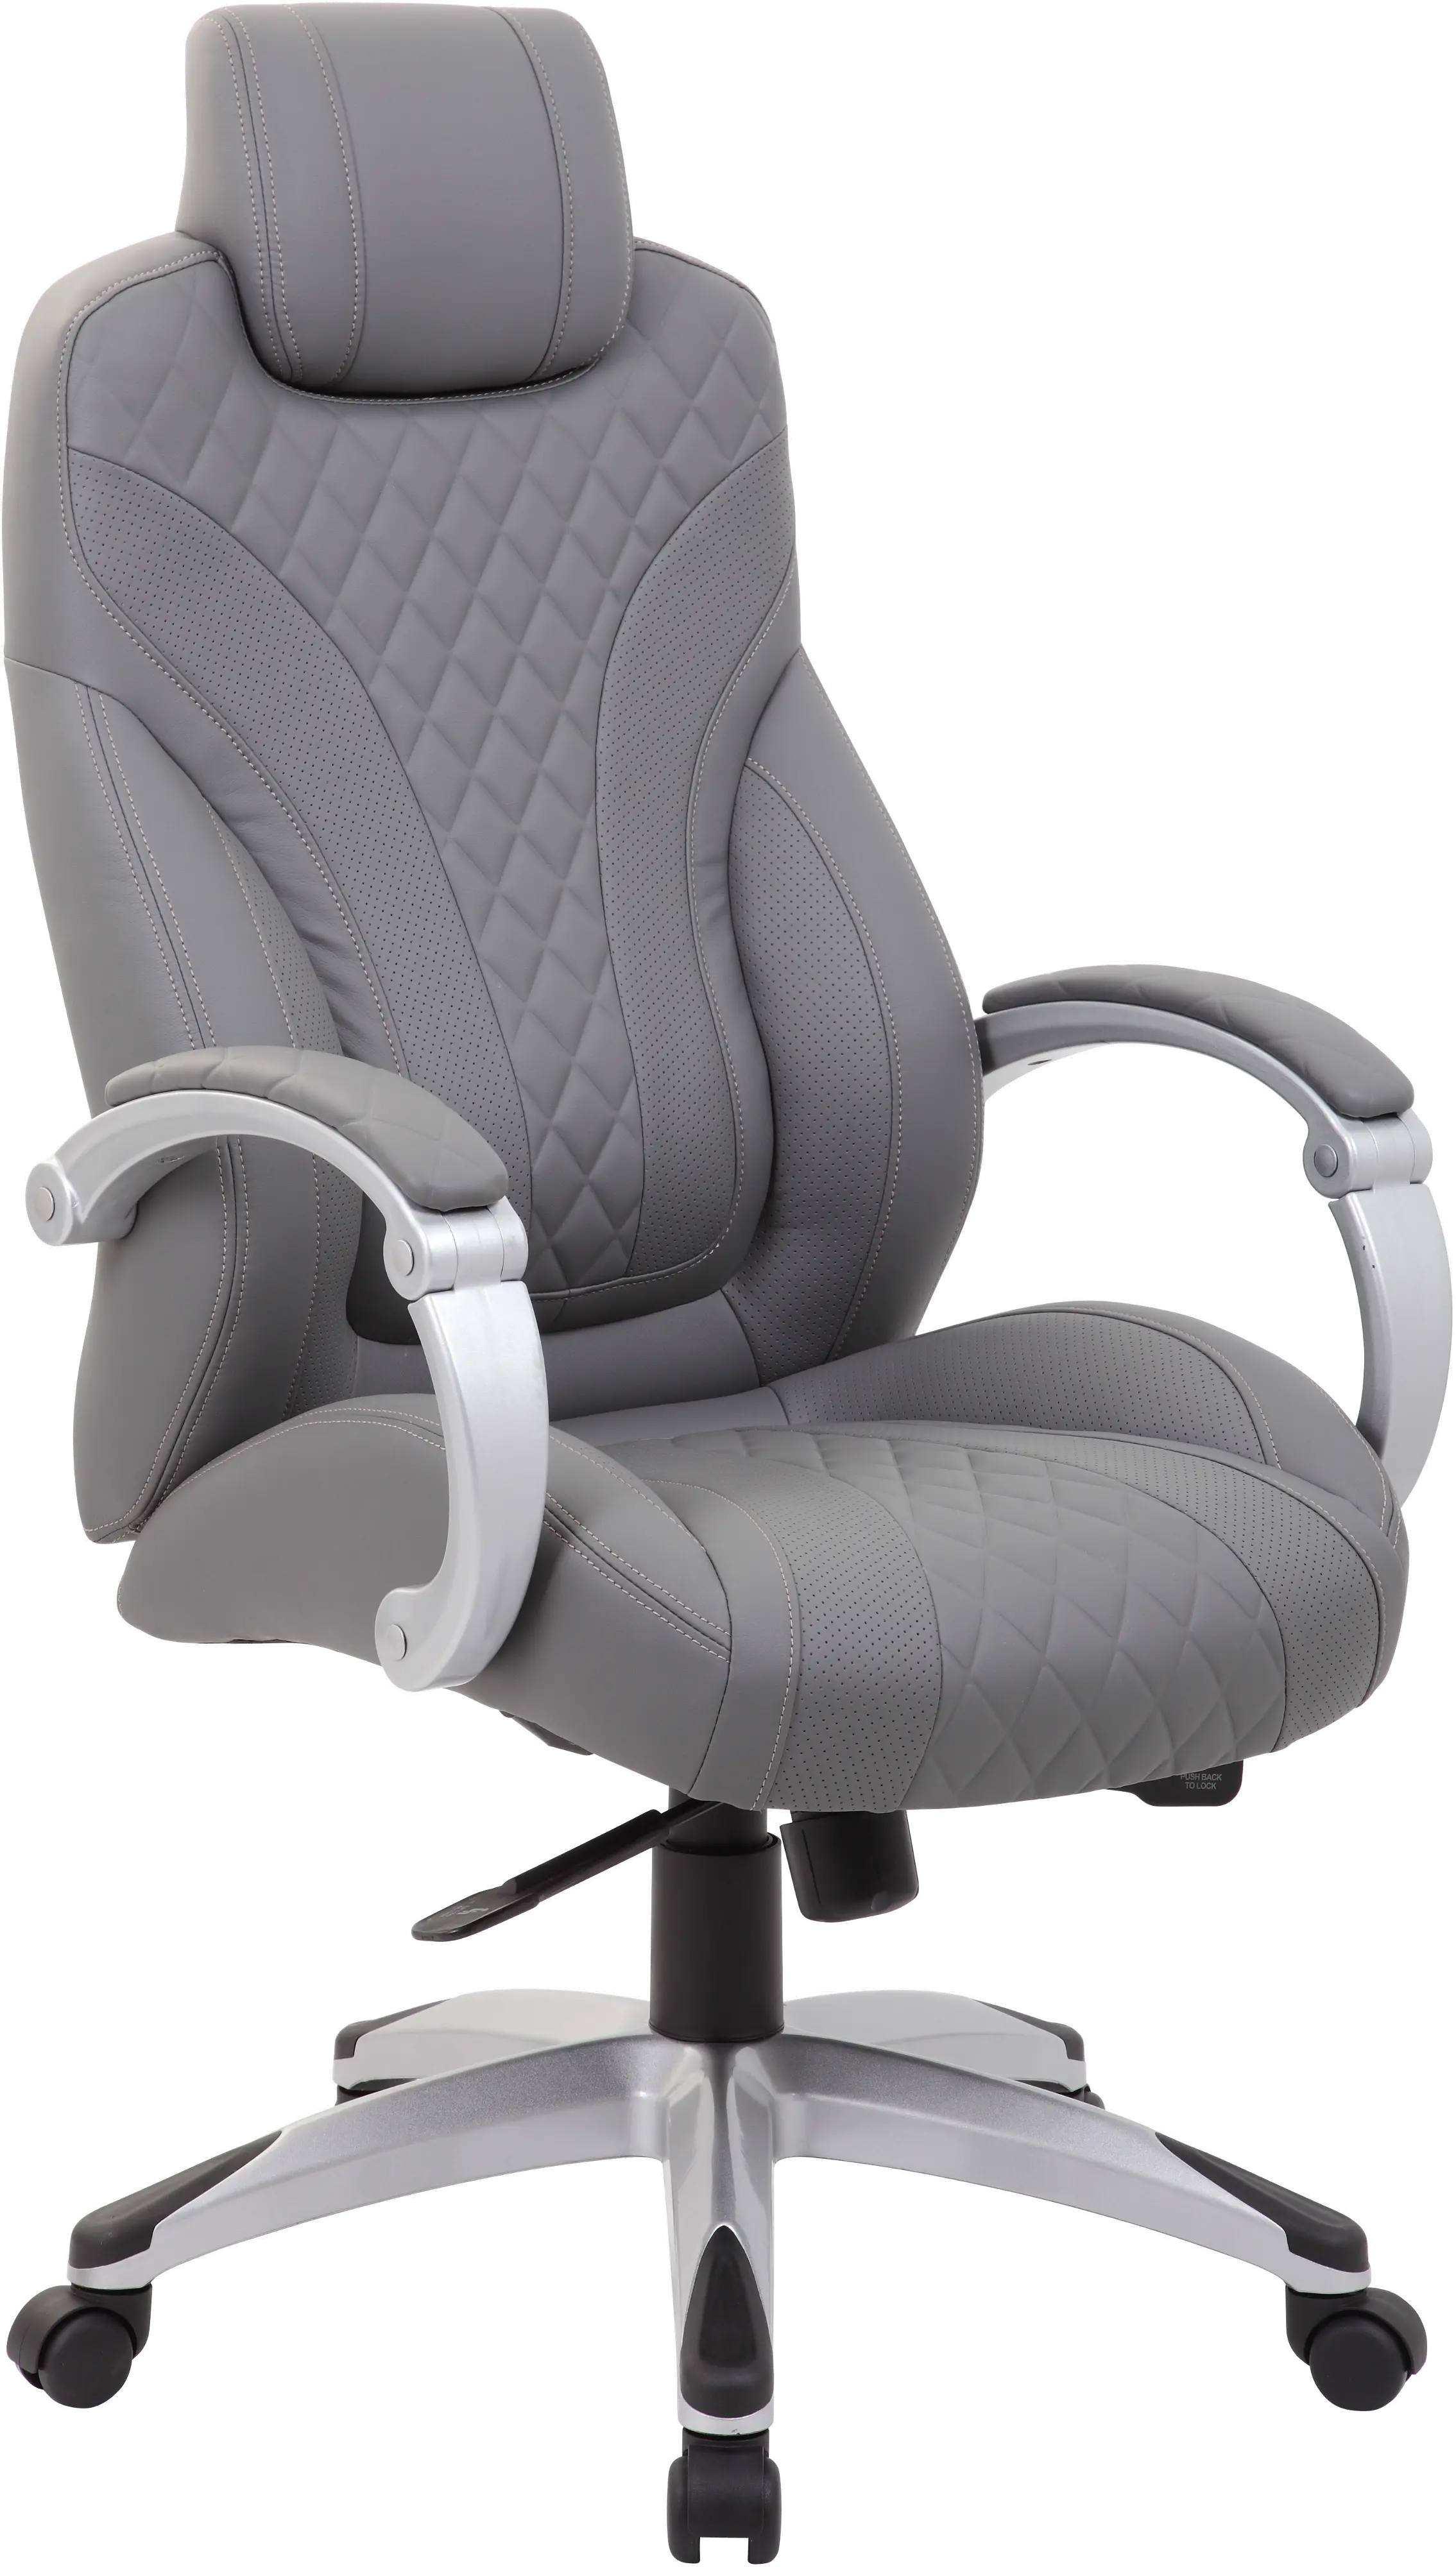 B8871-GY Boss Grey Executive Office Chair With Head Rest sku B8871-GY